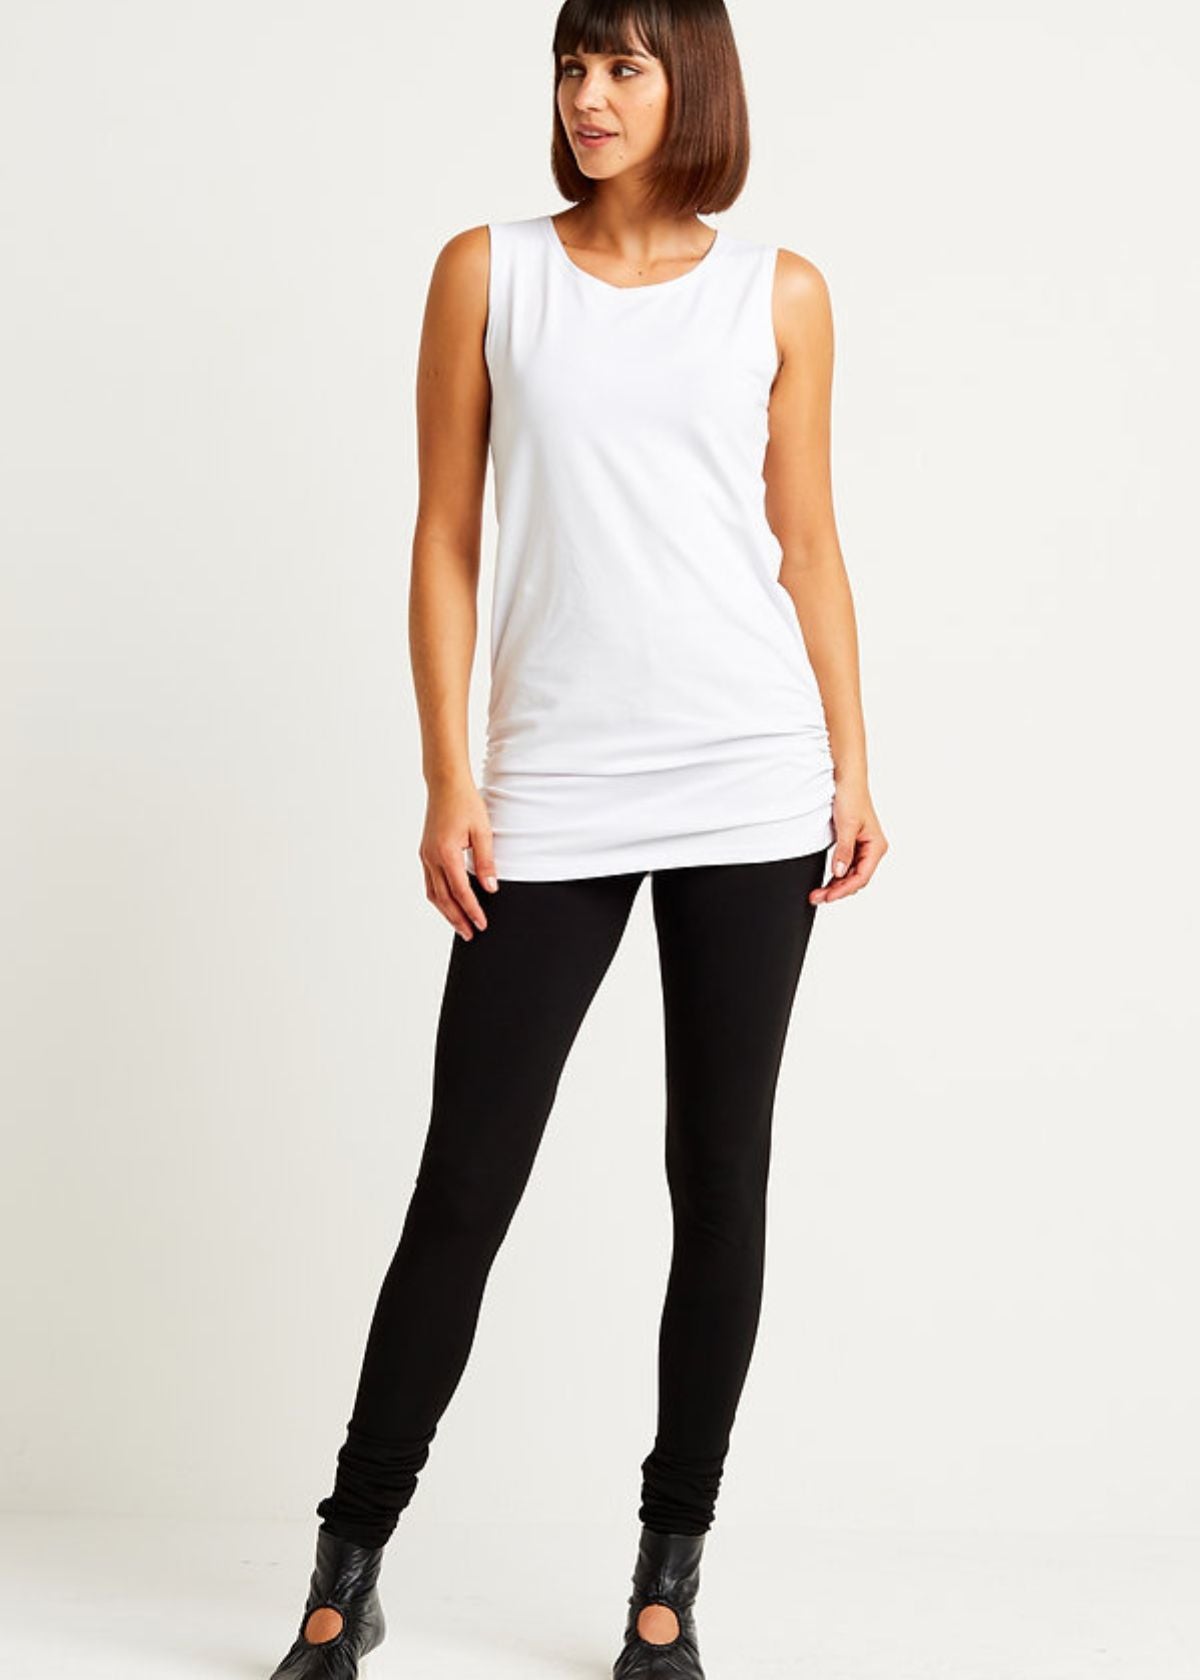 PLANET Ruched Tank - White